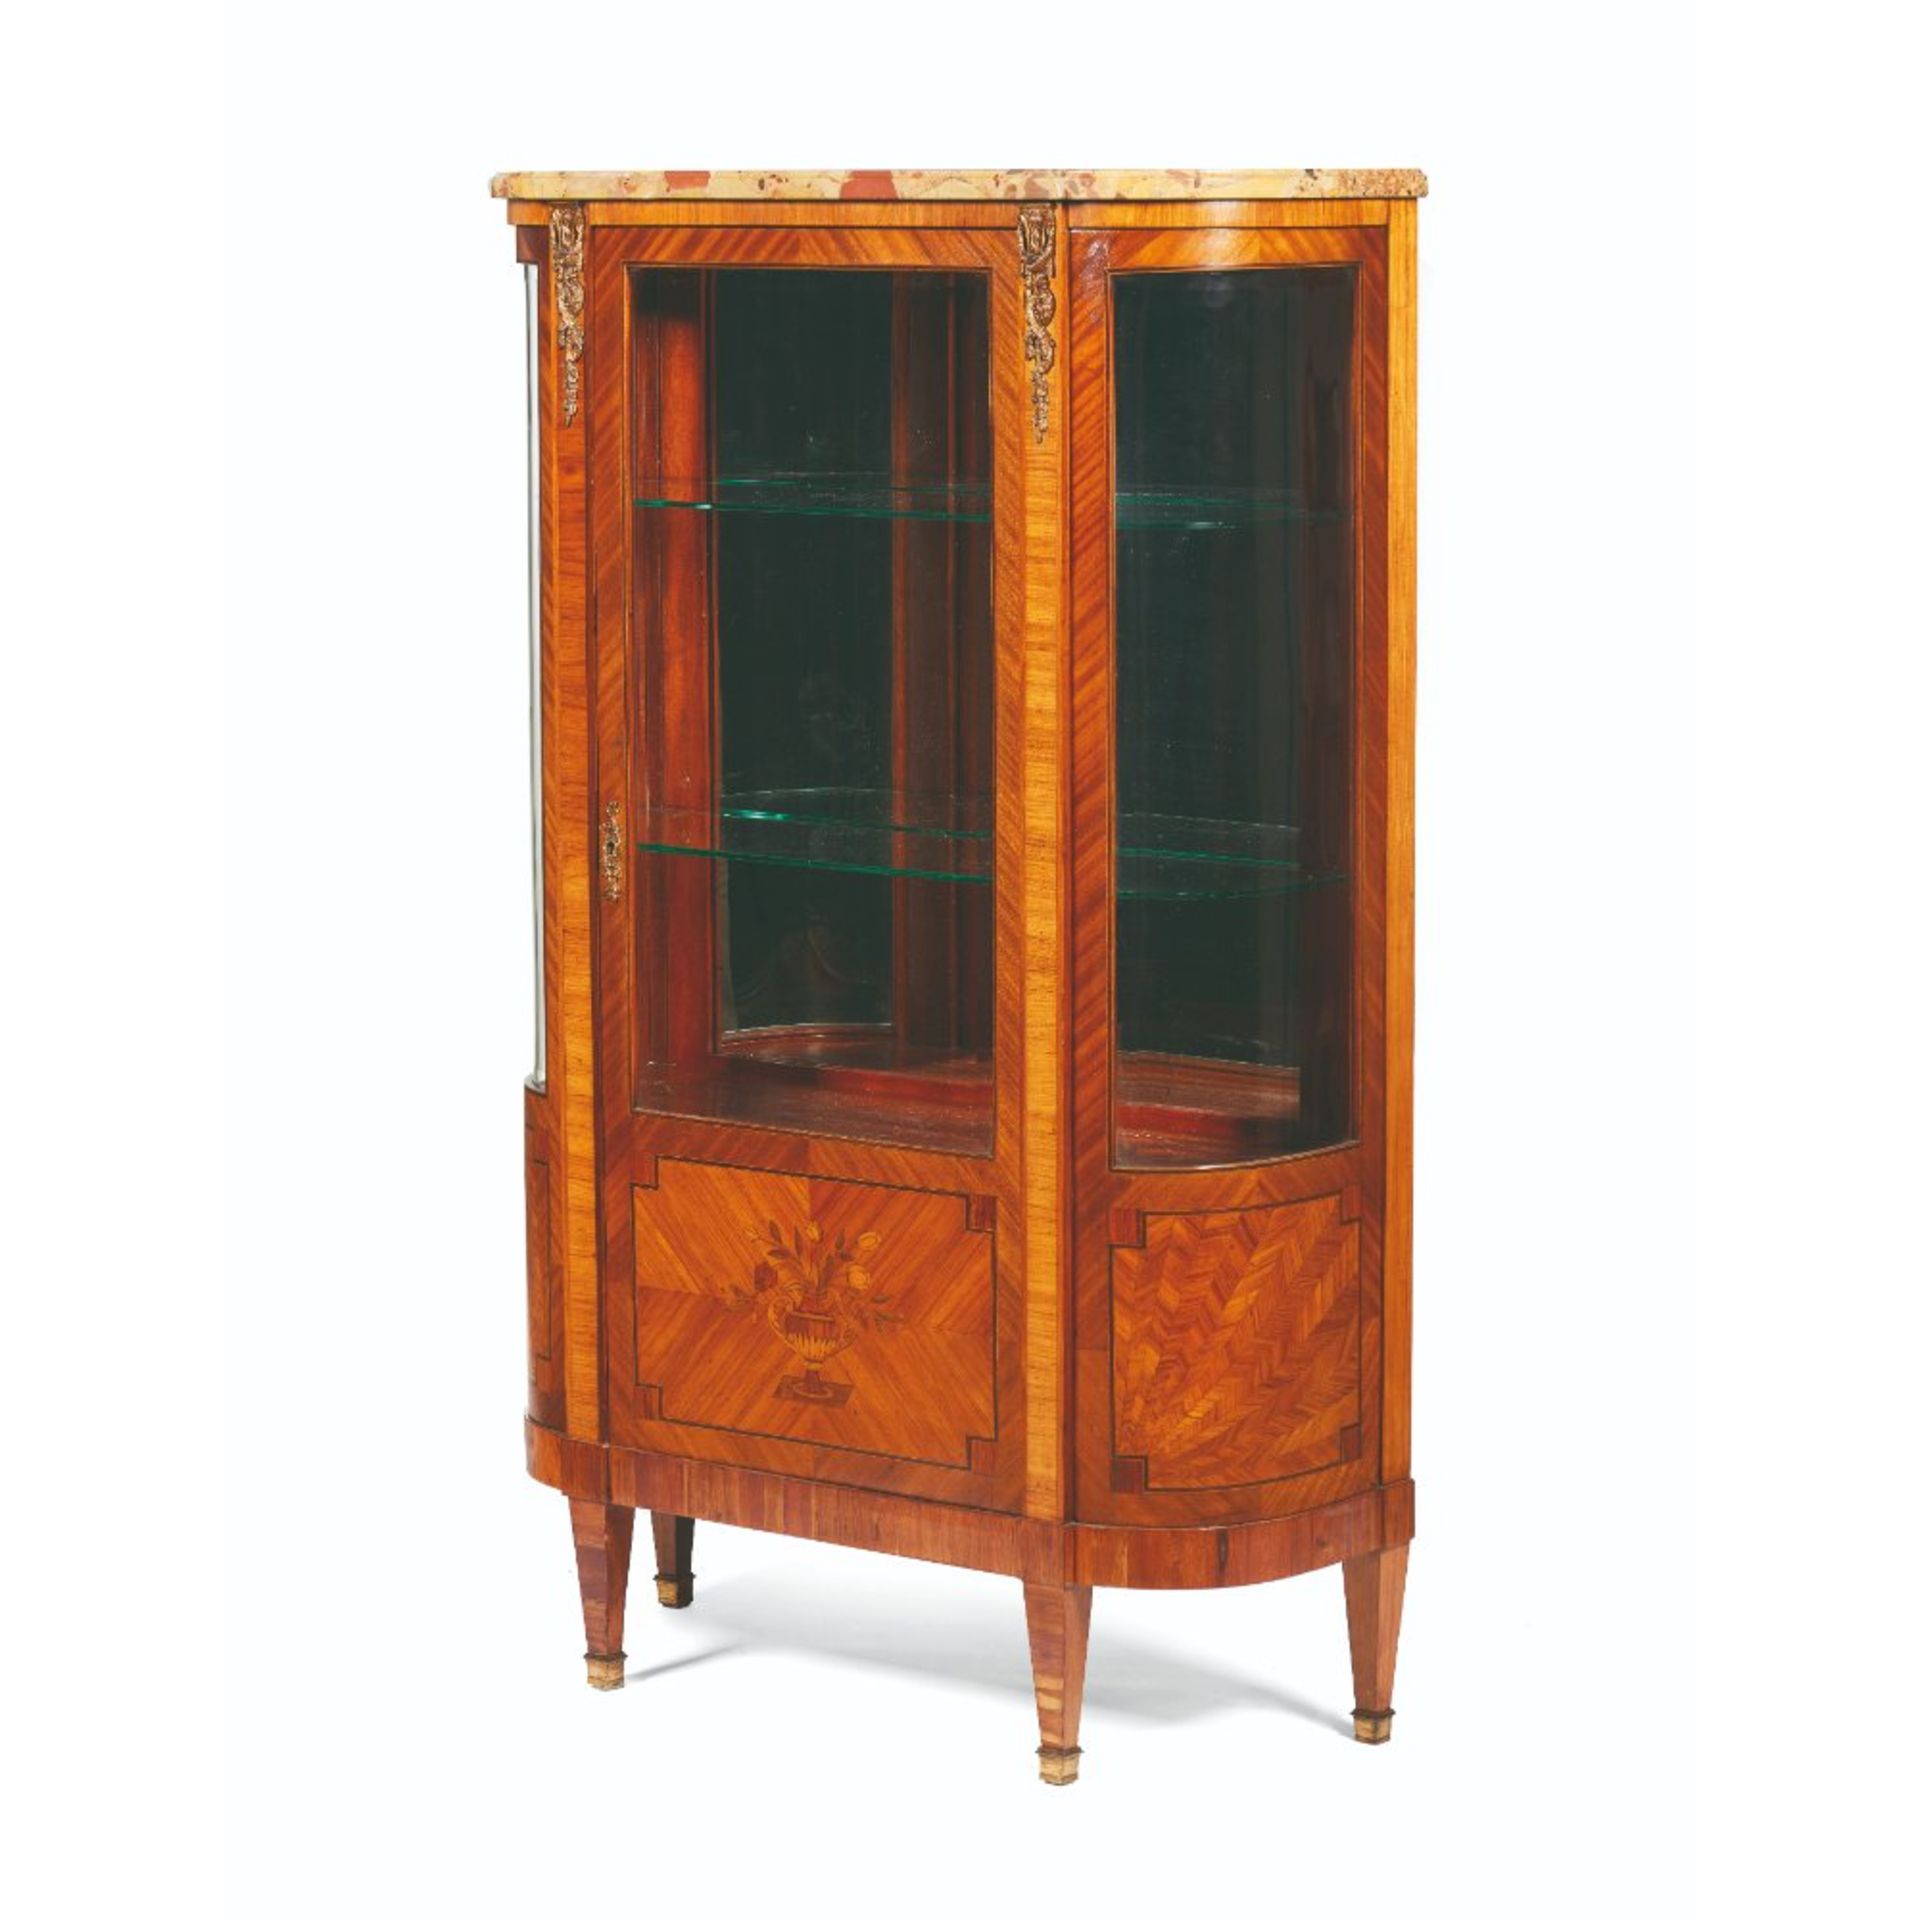 A Pair of Louis XVI style display cabinets - Image 2 of 3